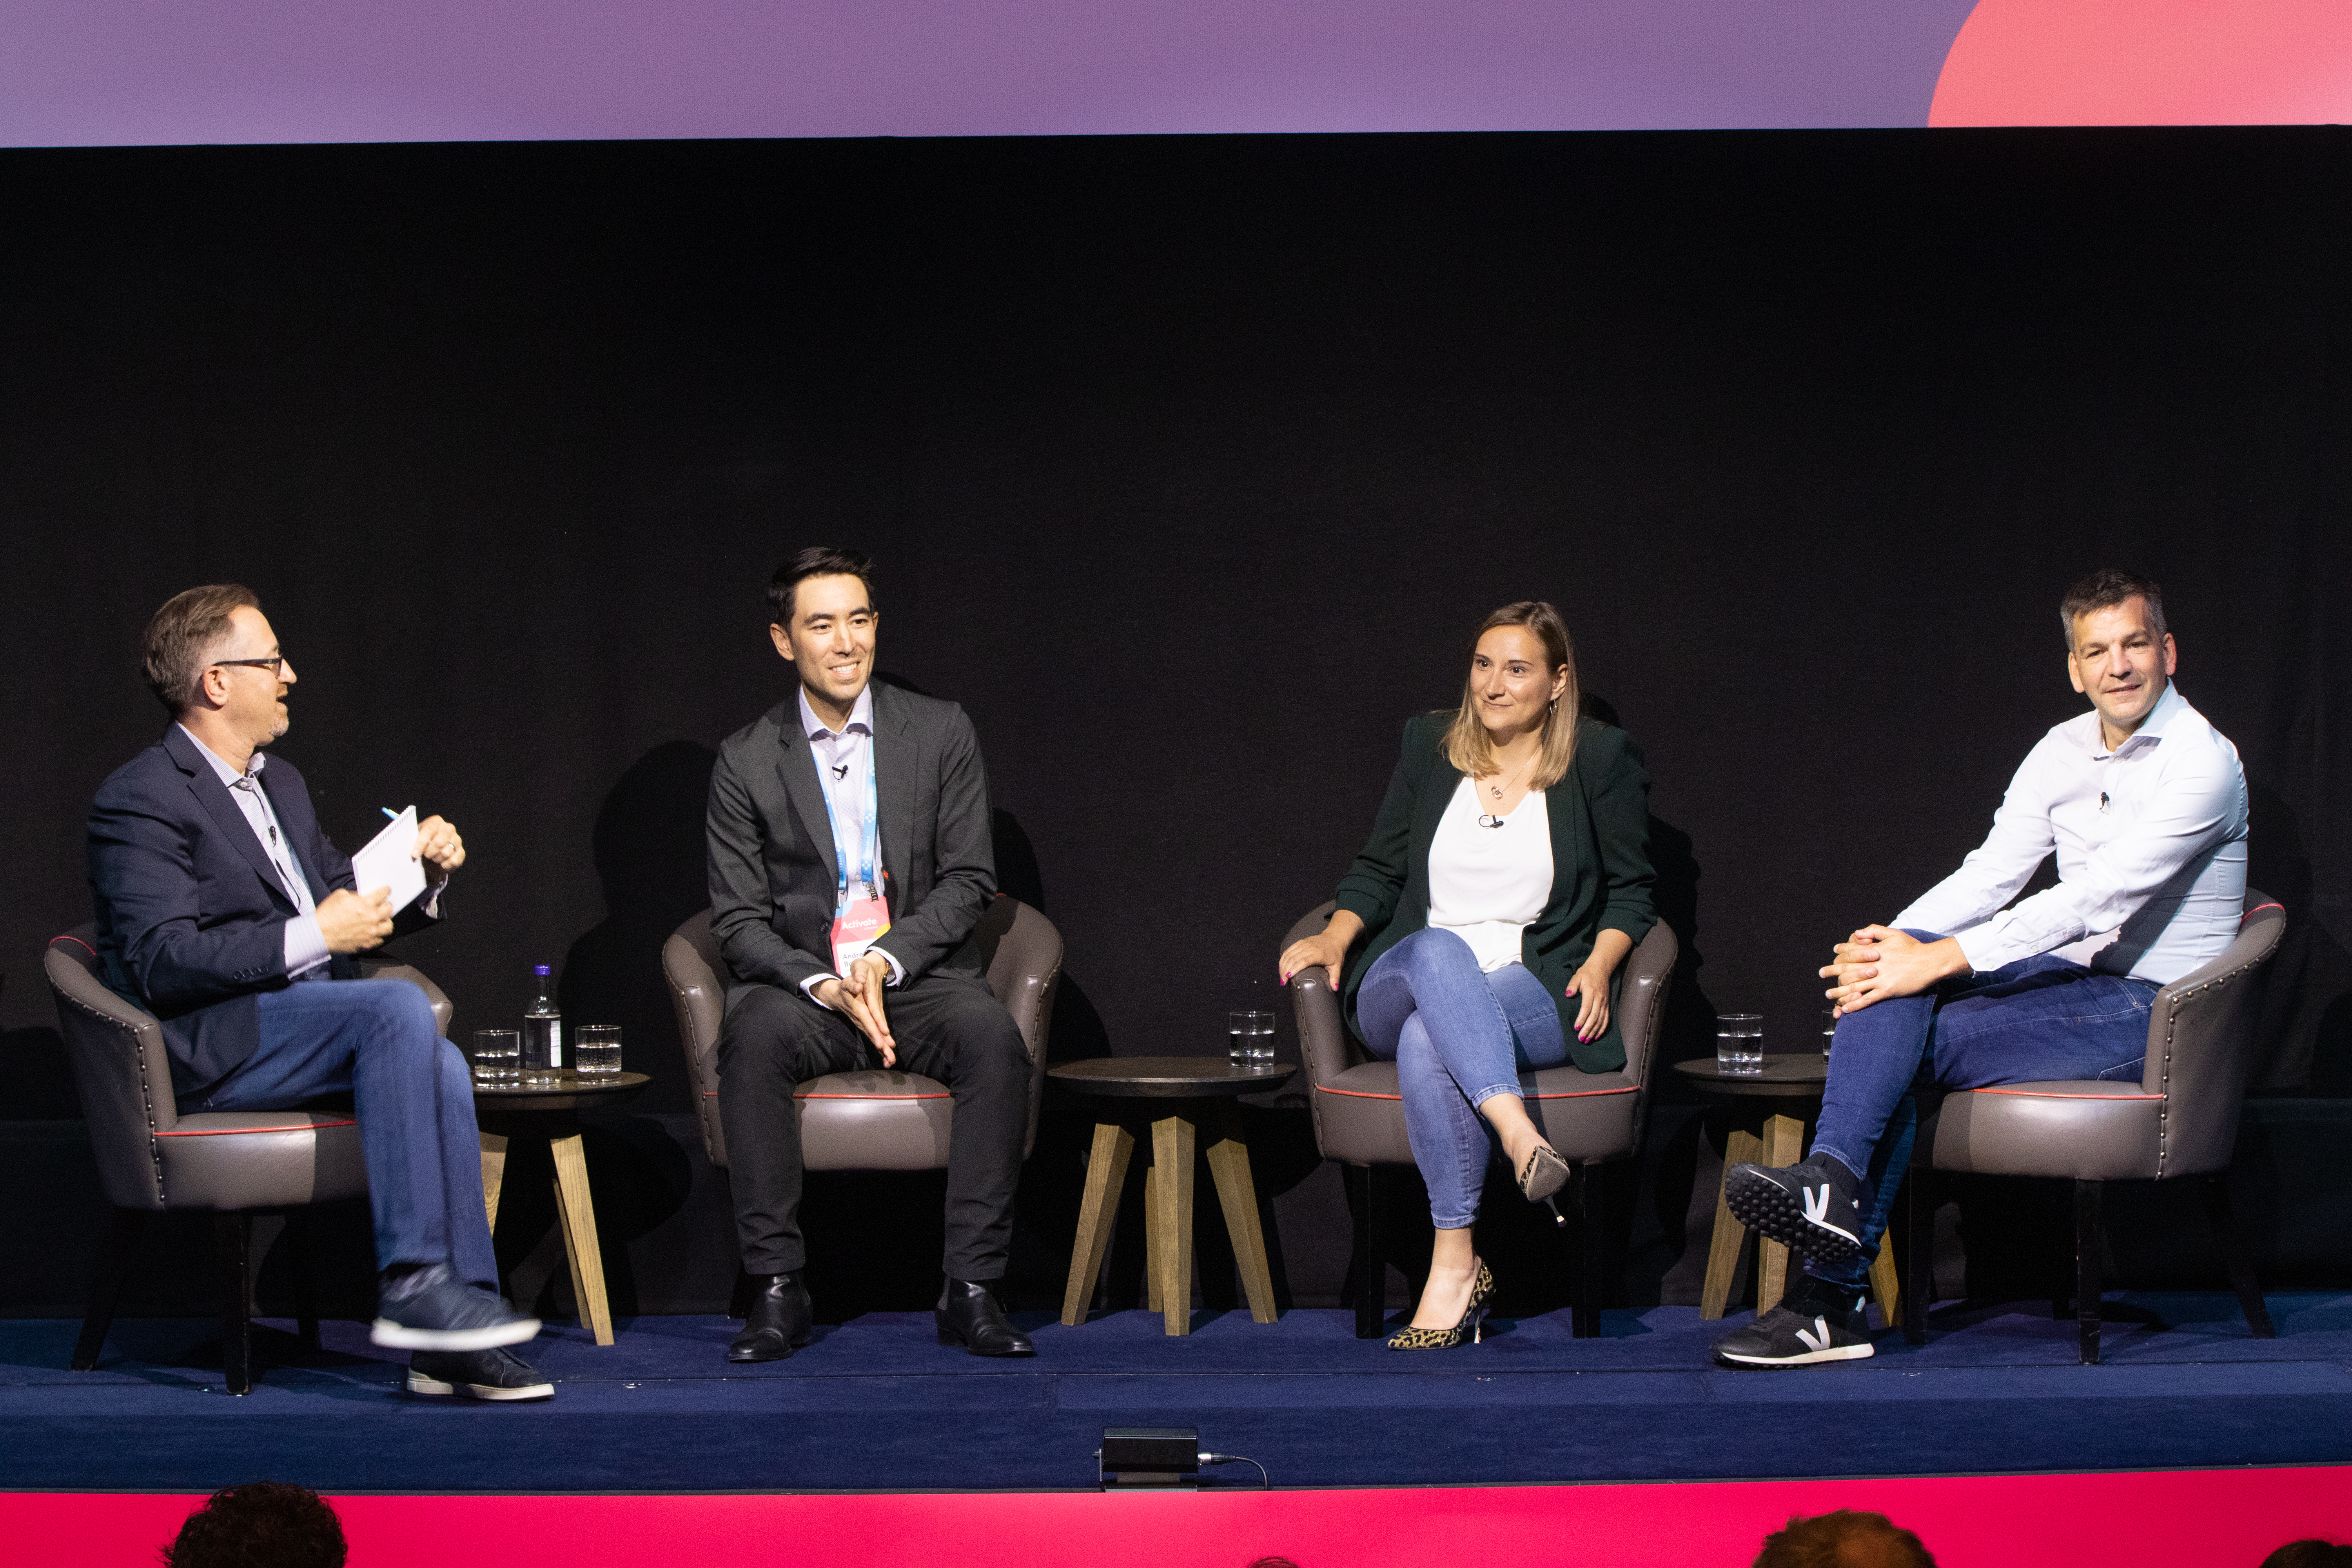 Jeff Samuels, COO of Iterable discusses "AI Beyond the Hype" with Andrew Boni and two Iterable customers — Ben Carter, Global Chief Customer and Marketing Officer of Carwow and Tamara Castelli, Chief Operating Officer at UNiDAYS at Activate Tour London.